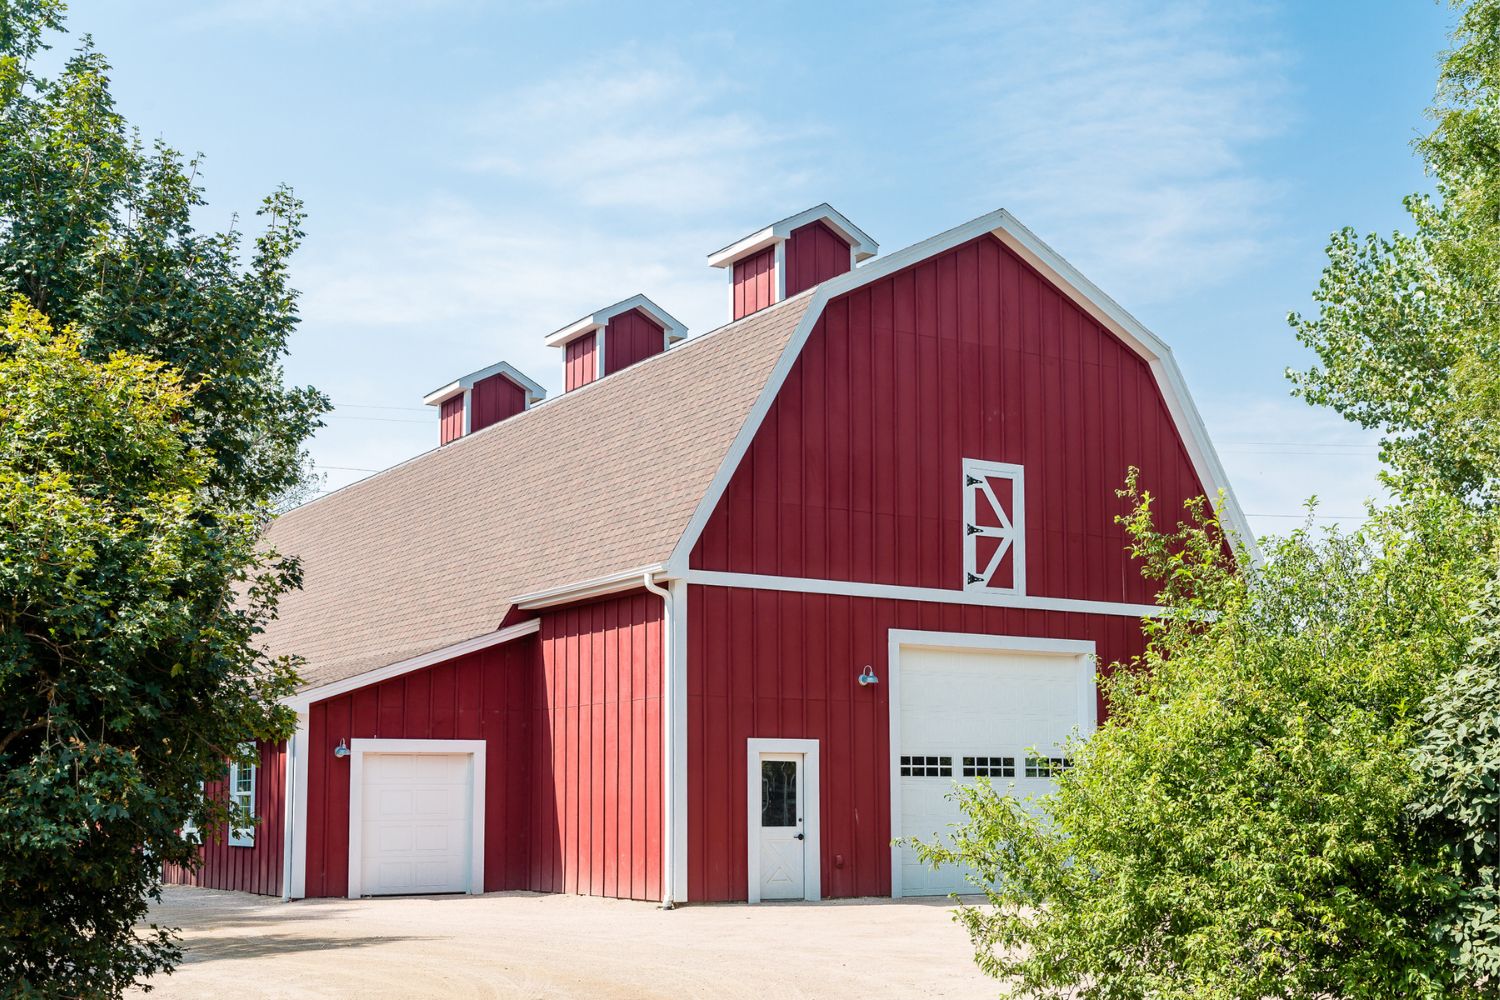 Factors Affecting the Cost of Building a Pole Barn House